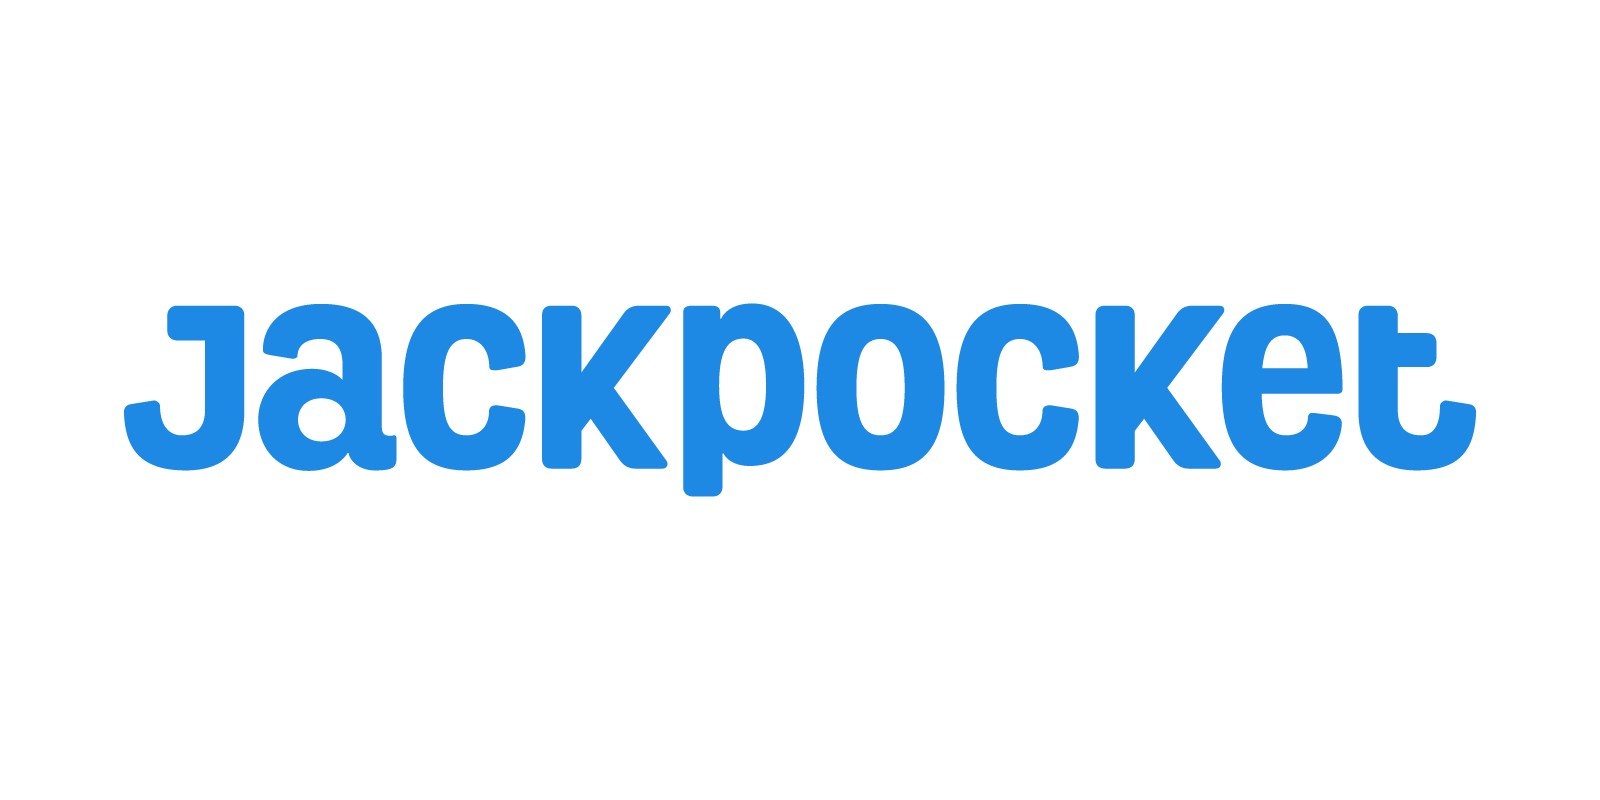 Jackpocket is the first third-party app in the United States that offers an easy, secure way to order official state lottery tickets. (PRNewsfoto/Jackpocket)